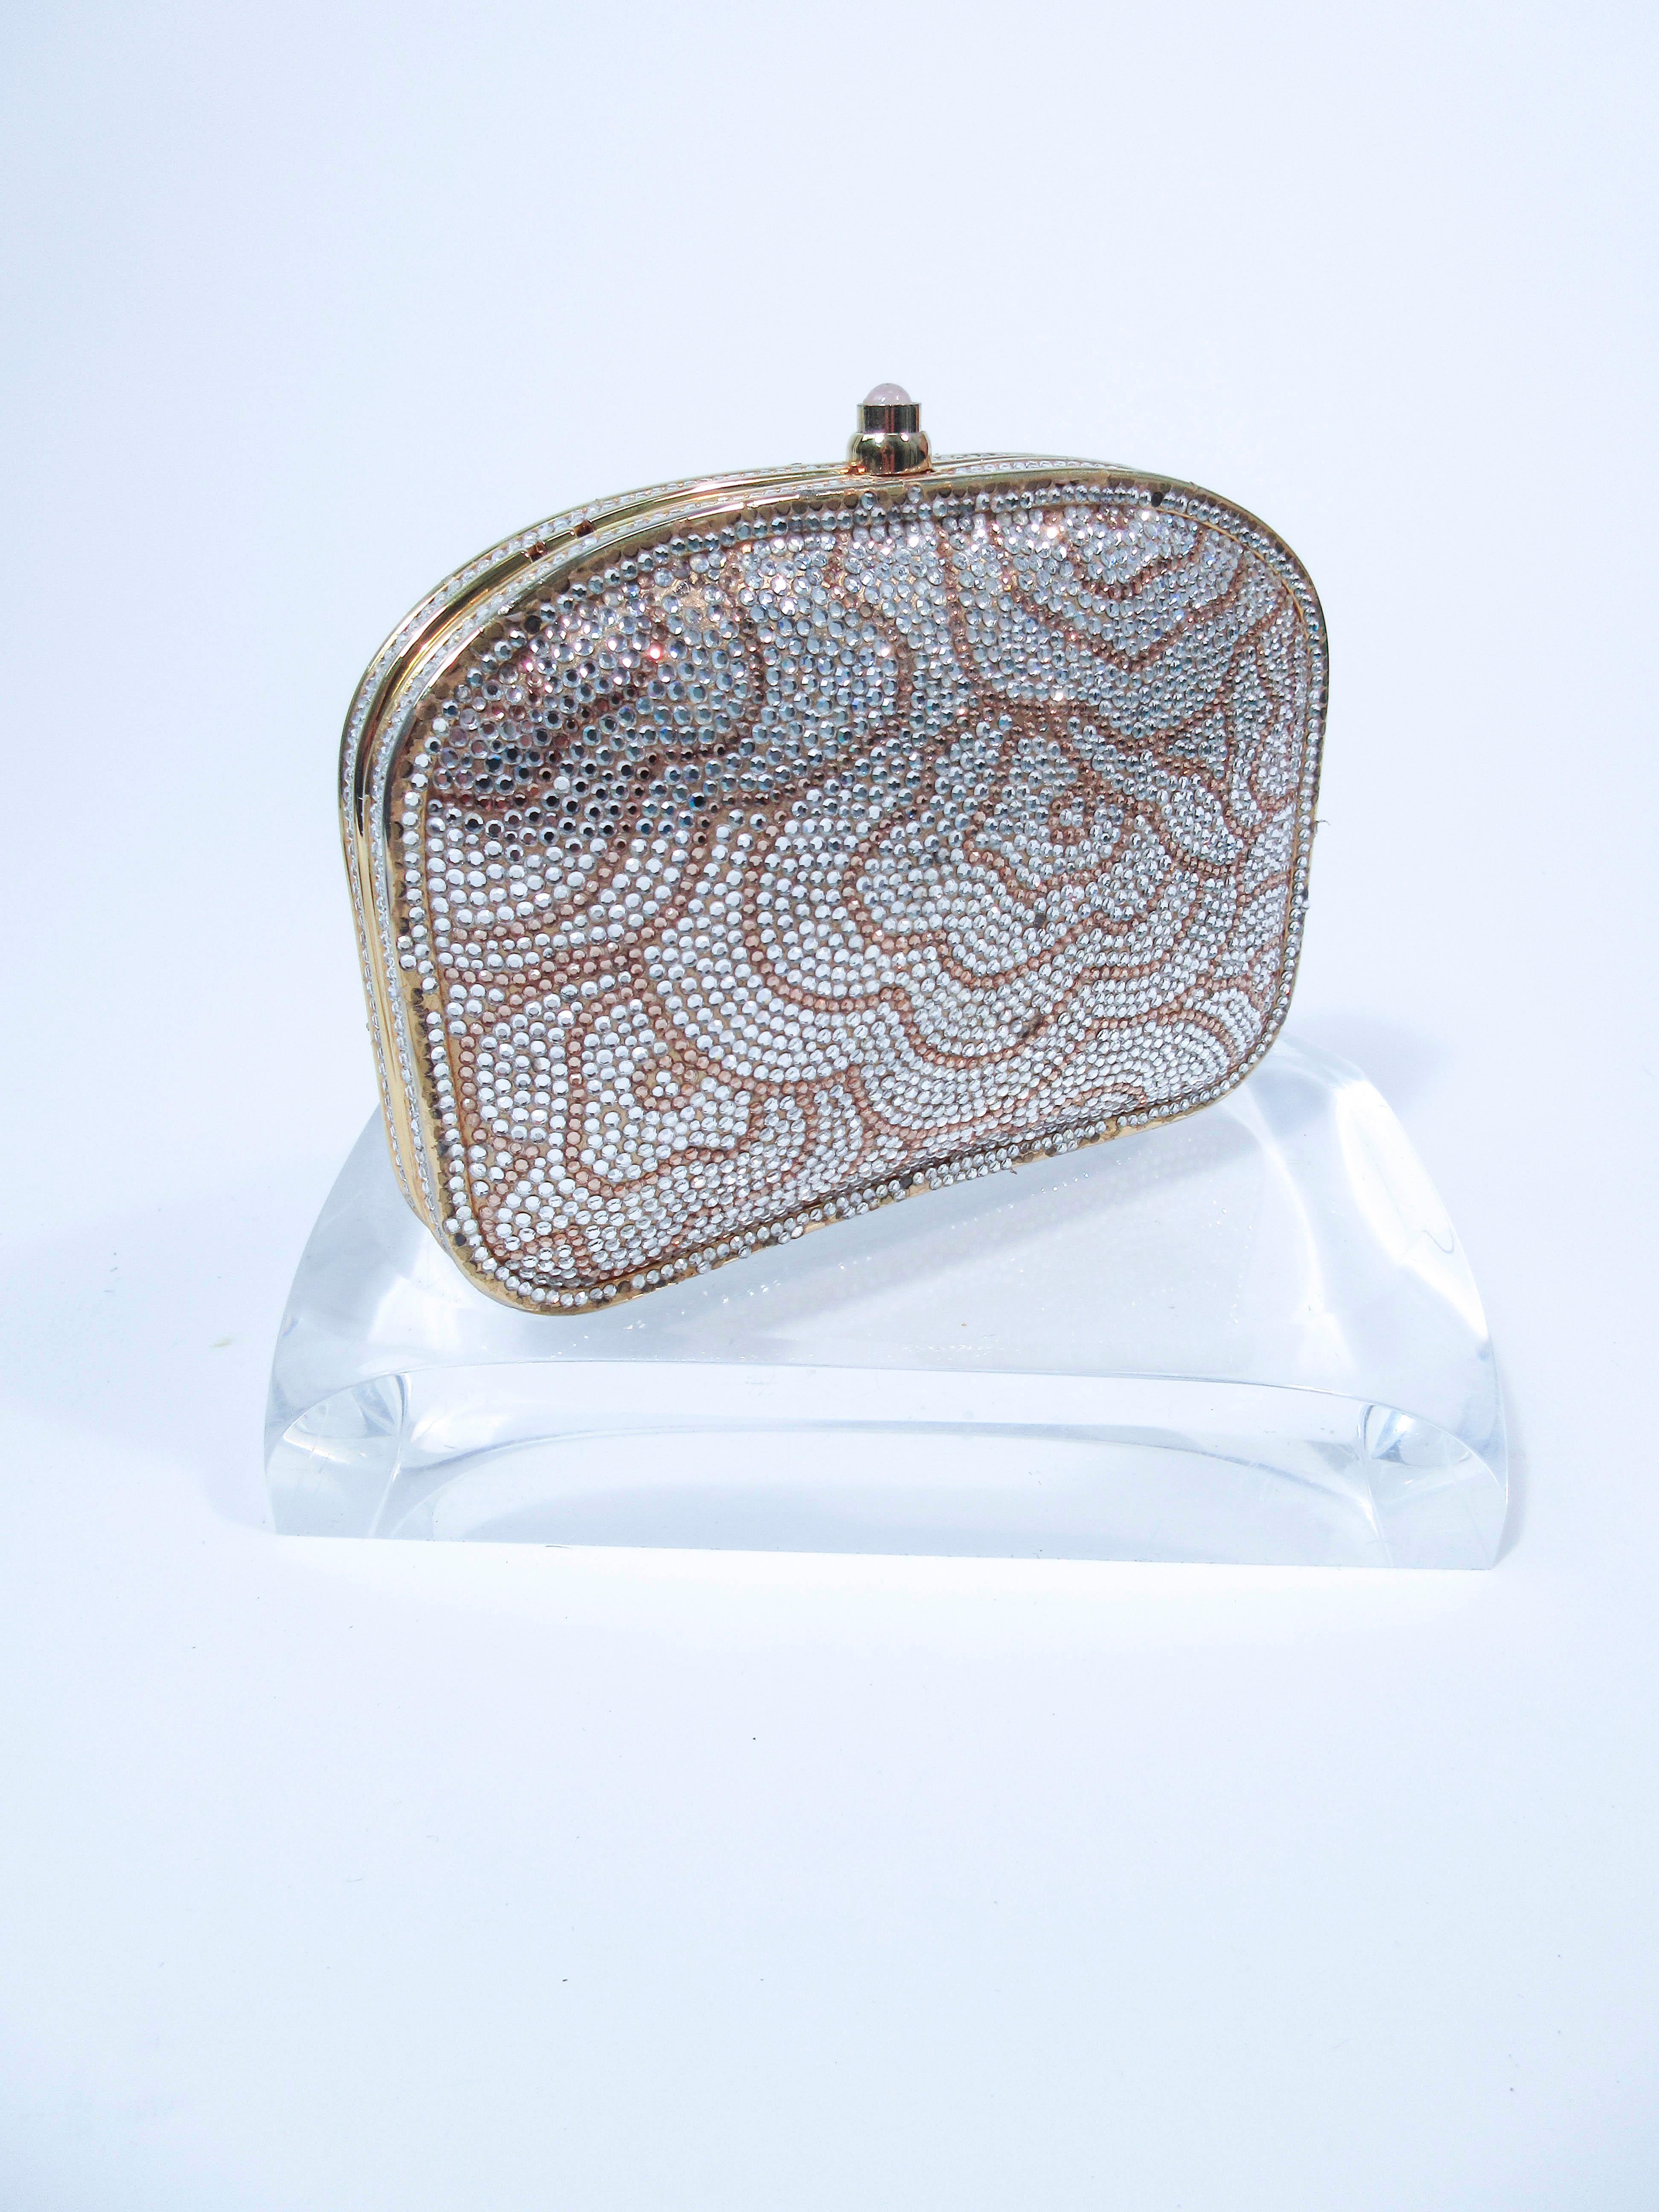 JUDITH LEIBER Gold & Silver Tone Rosette Clutch Optional Strap  In Good Condition For Sale In Los Angeles, CA